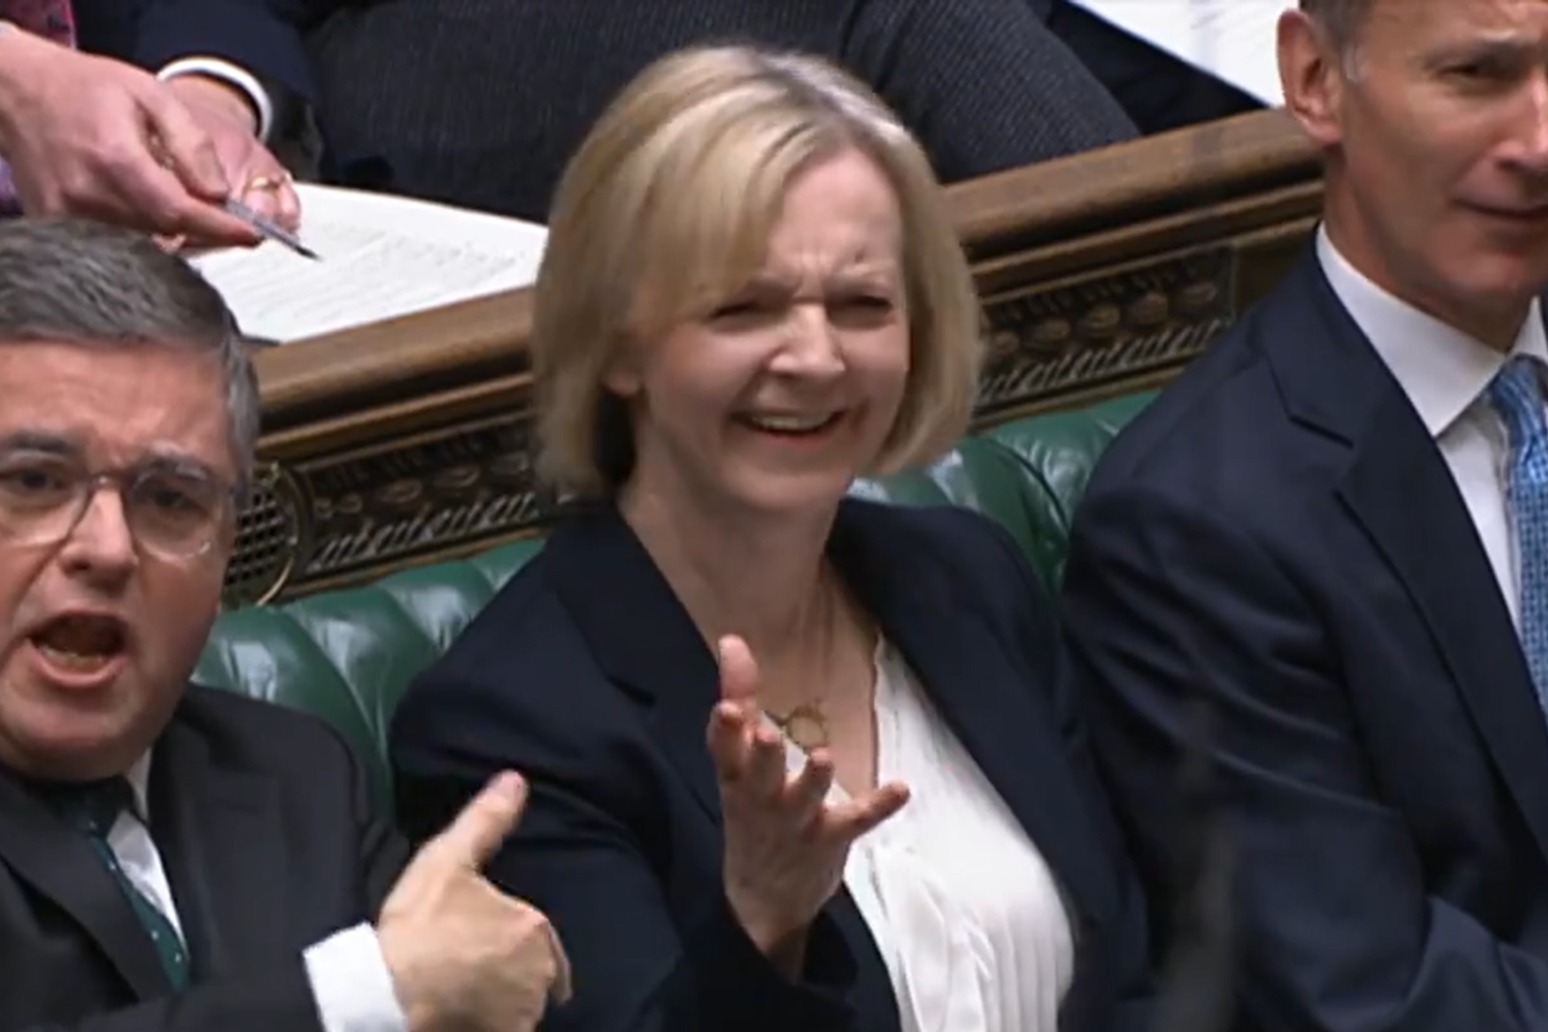 Liz Truss meets 1922 Committee chairman after acknowledging ‘difficult day’ 